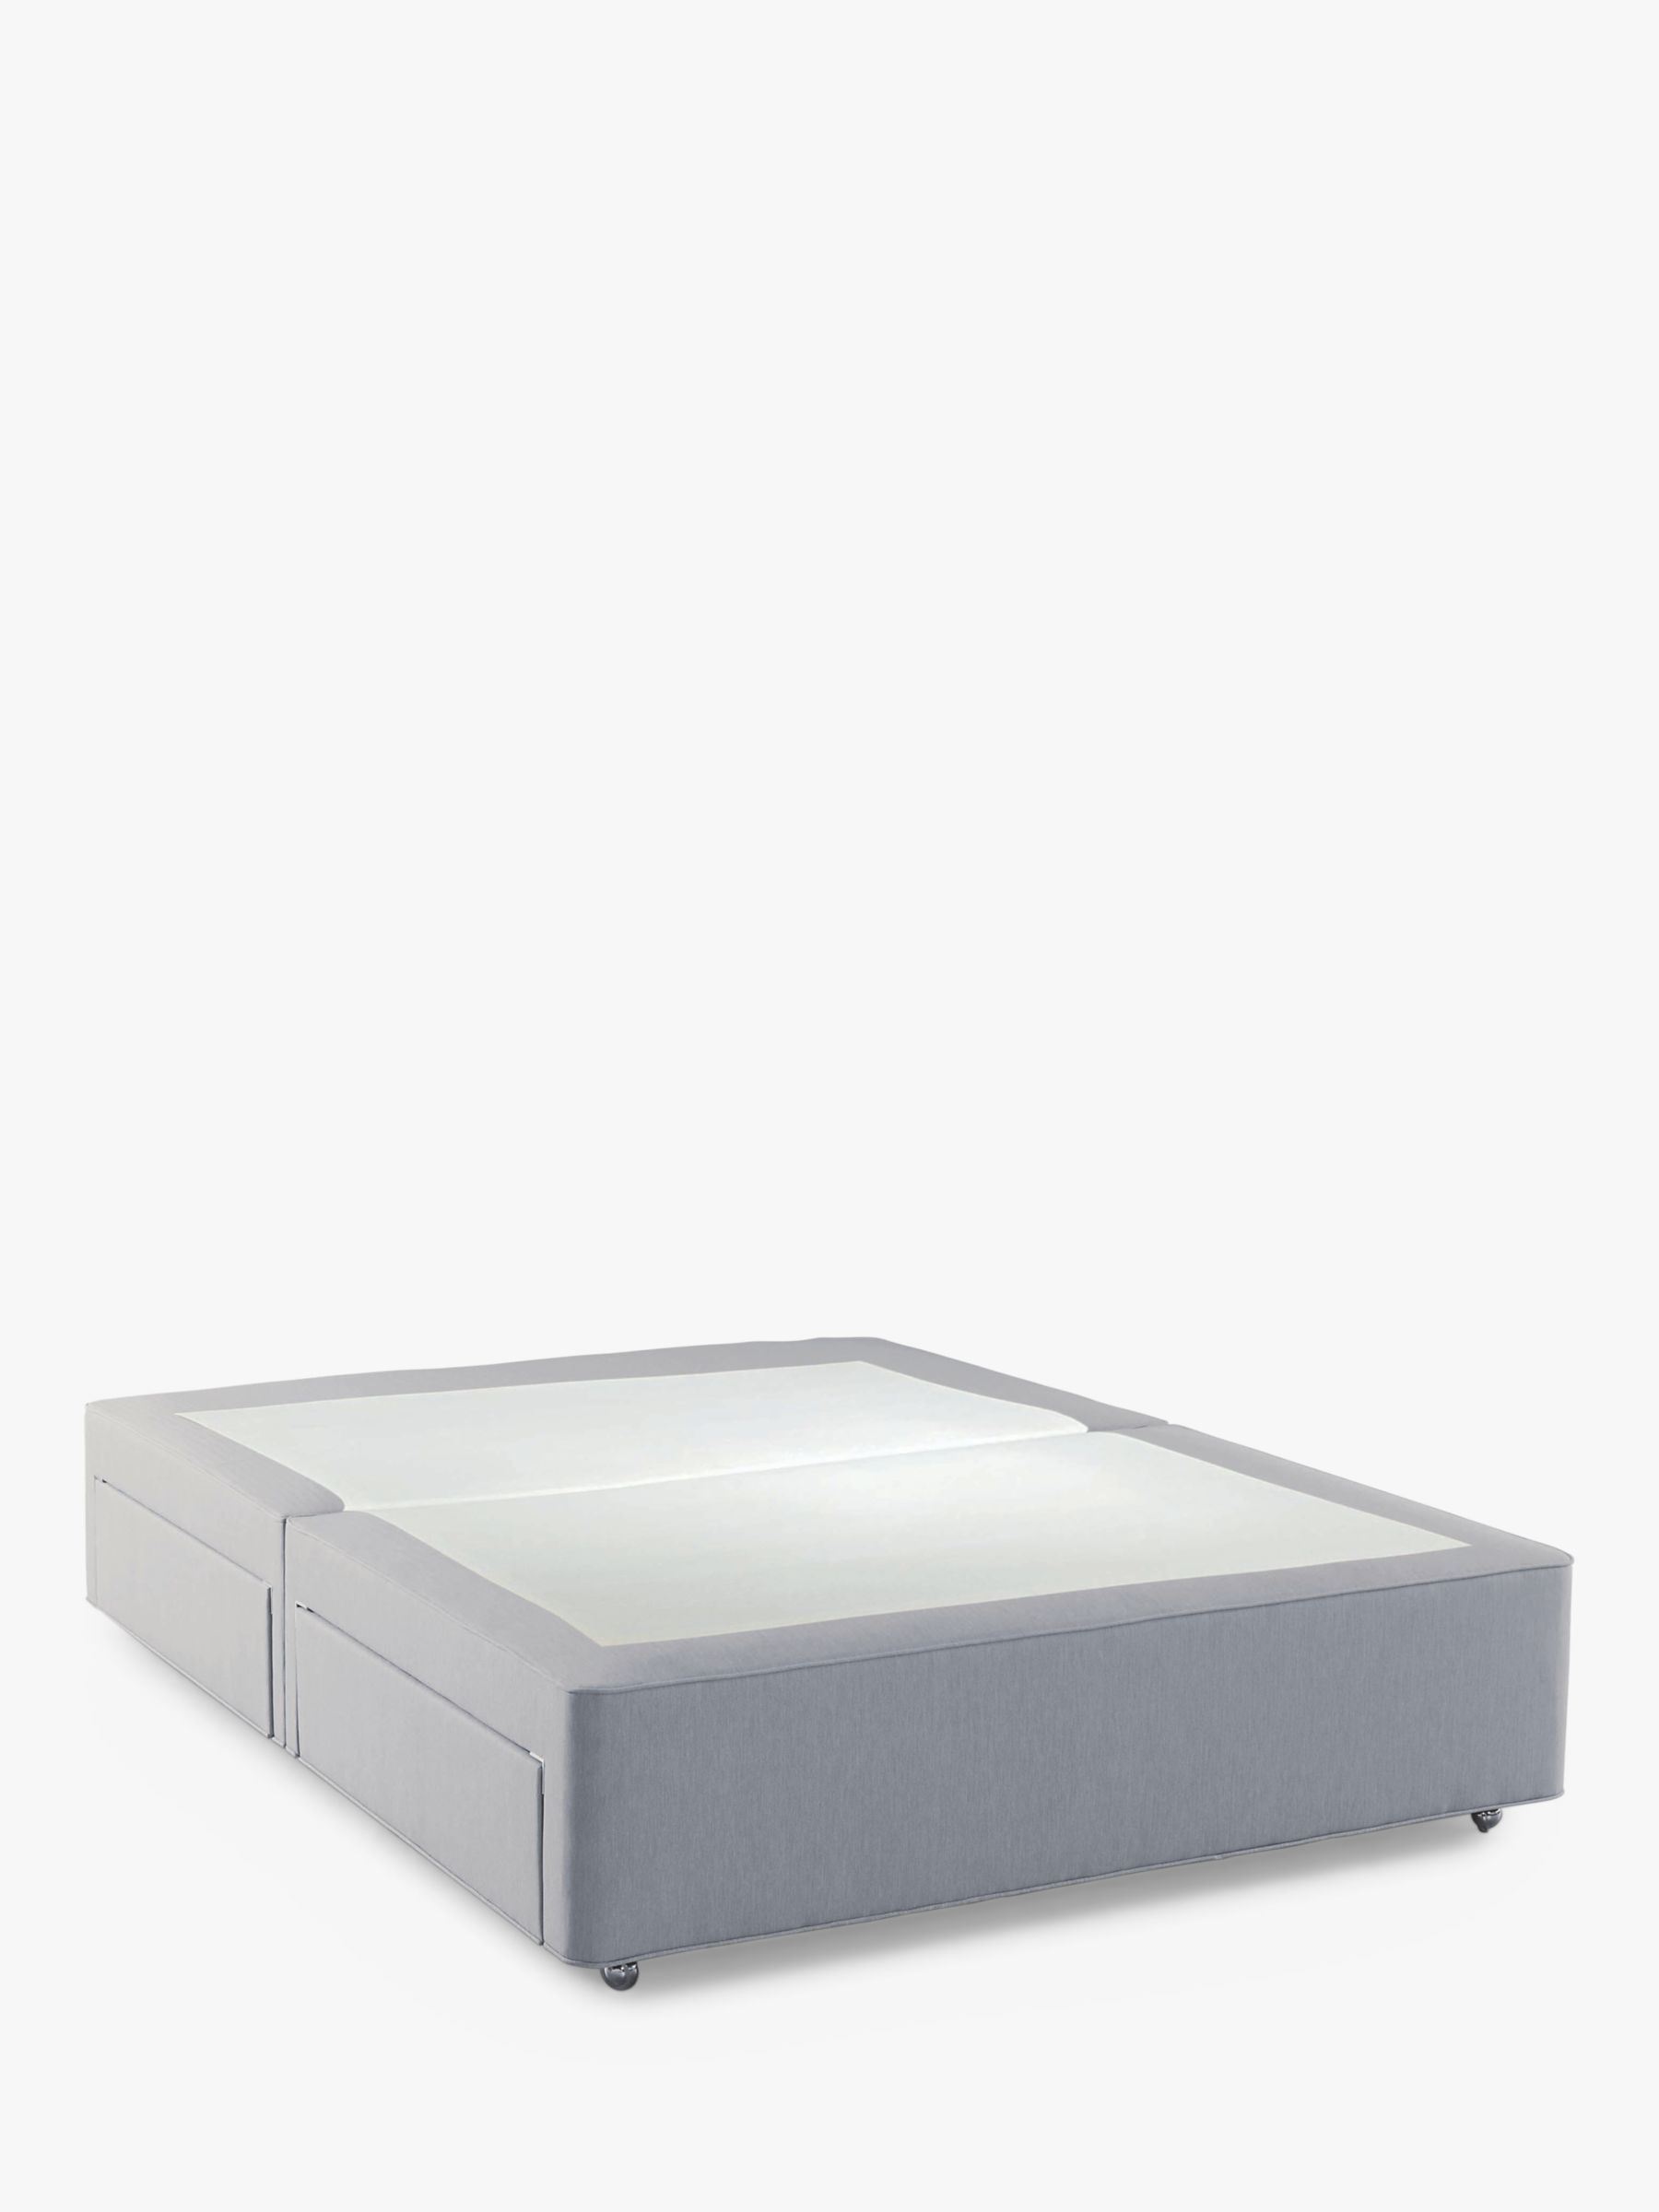 Hypnos Firm Edge 4 Drawer Divan Storage Bed Double At John Lewis